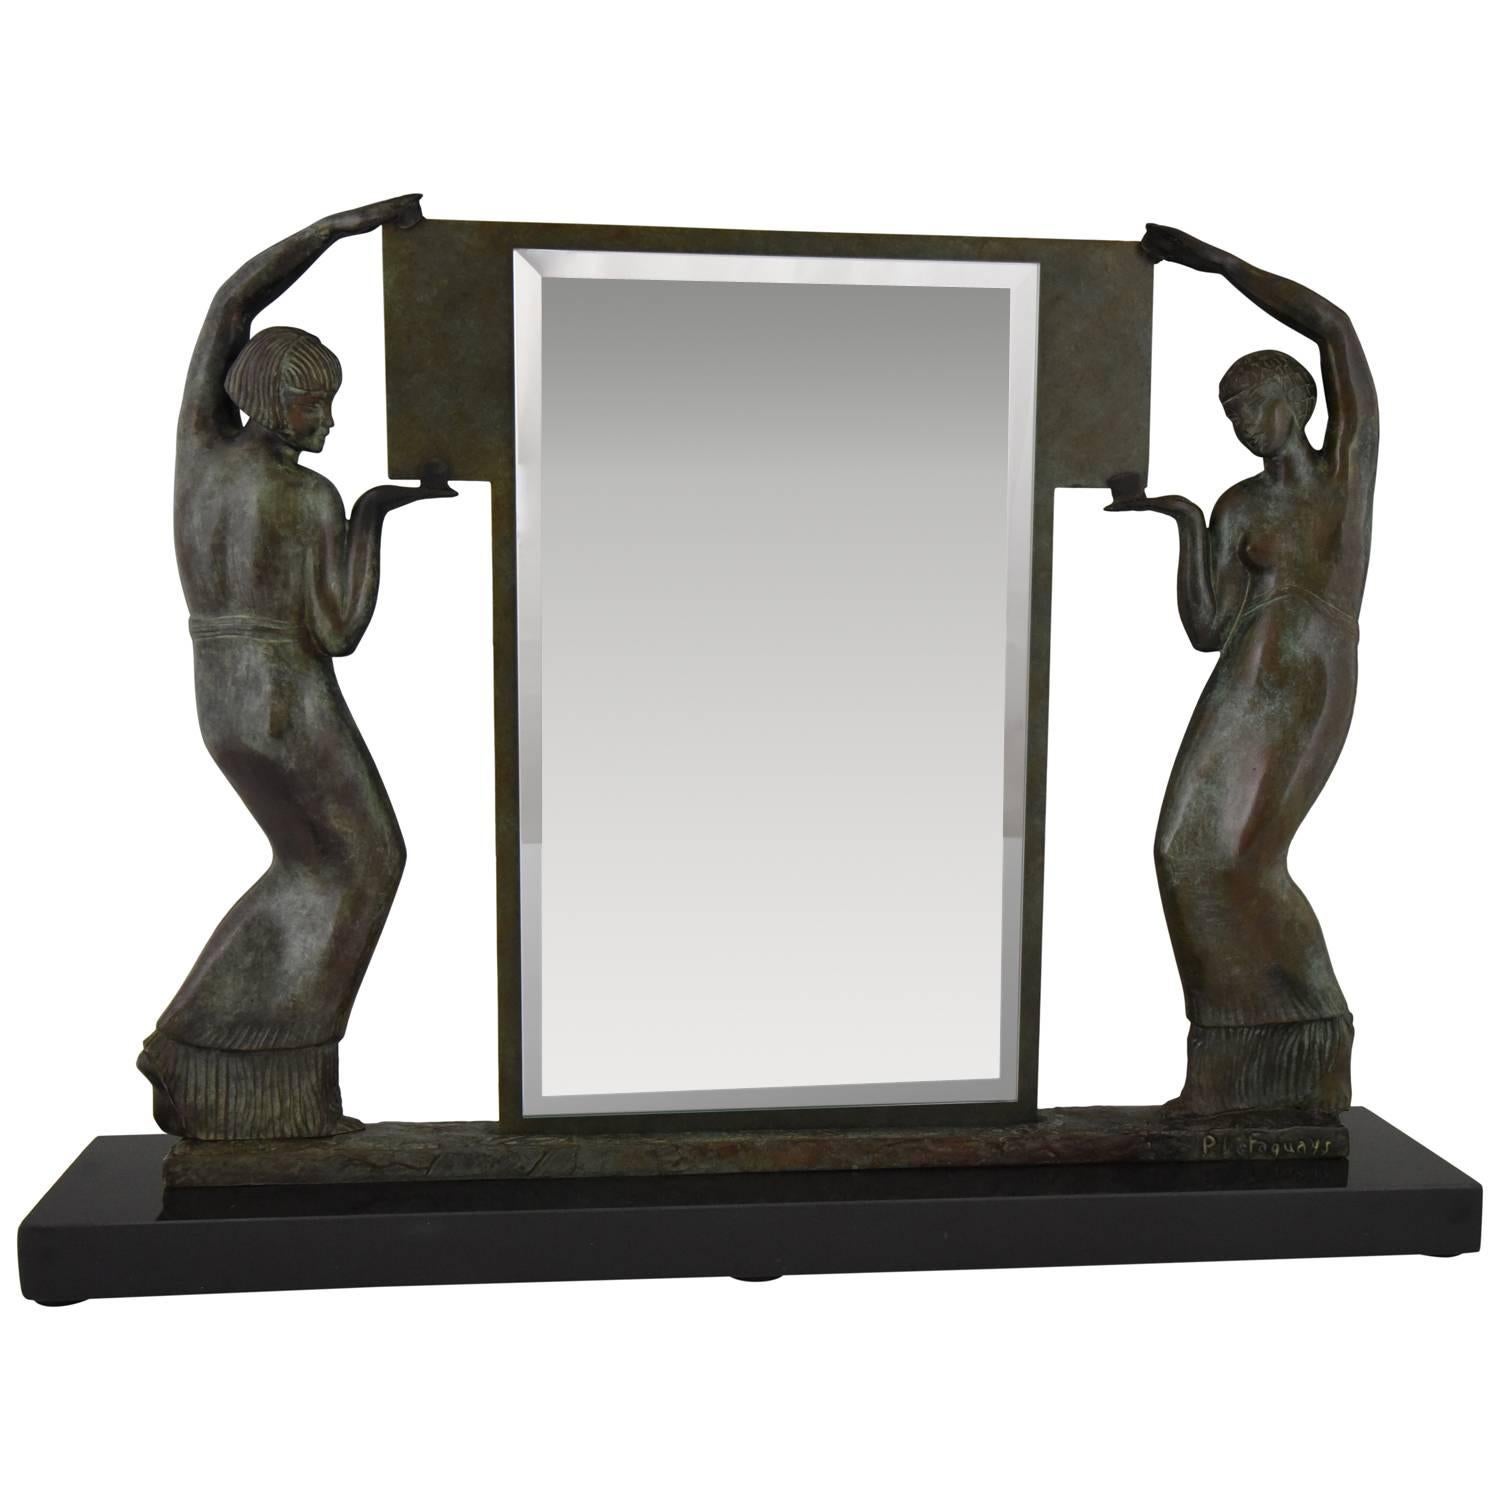 Exceptional bronze figural mirror with two ladies holding the mirror glass signed by the French artist Pierre Le Faguays. Beautiful green patina with shades on a Belgian black marble base.

Artist/ maker: Pierre Le Faguays
Signature/ marks: P. Le